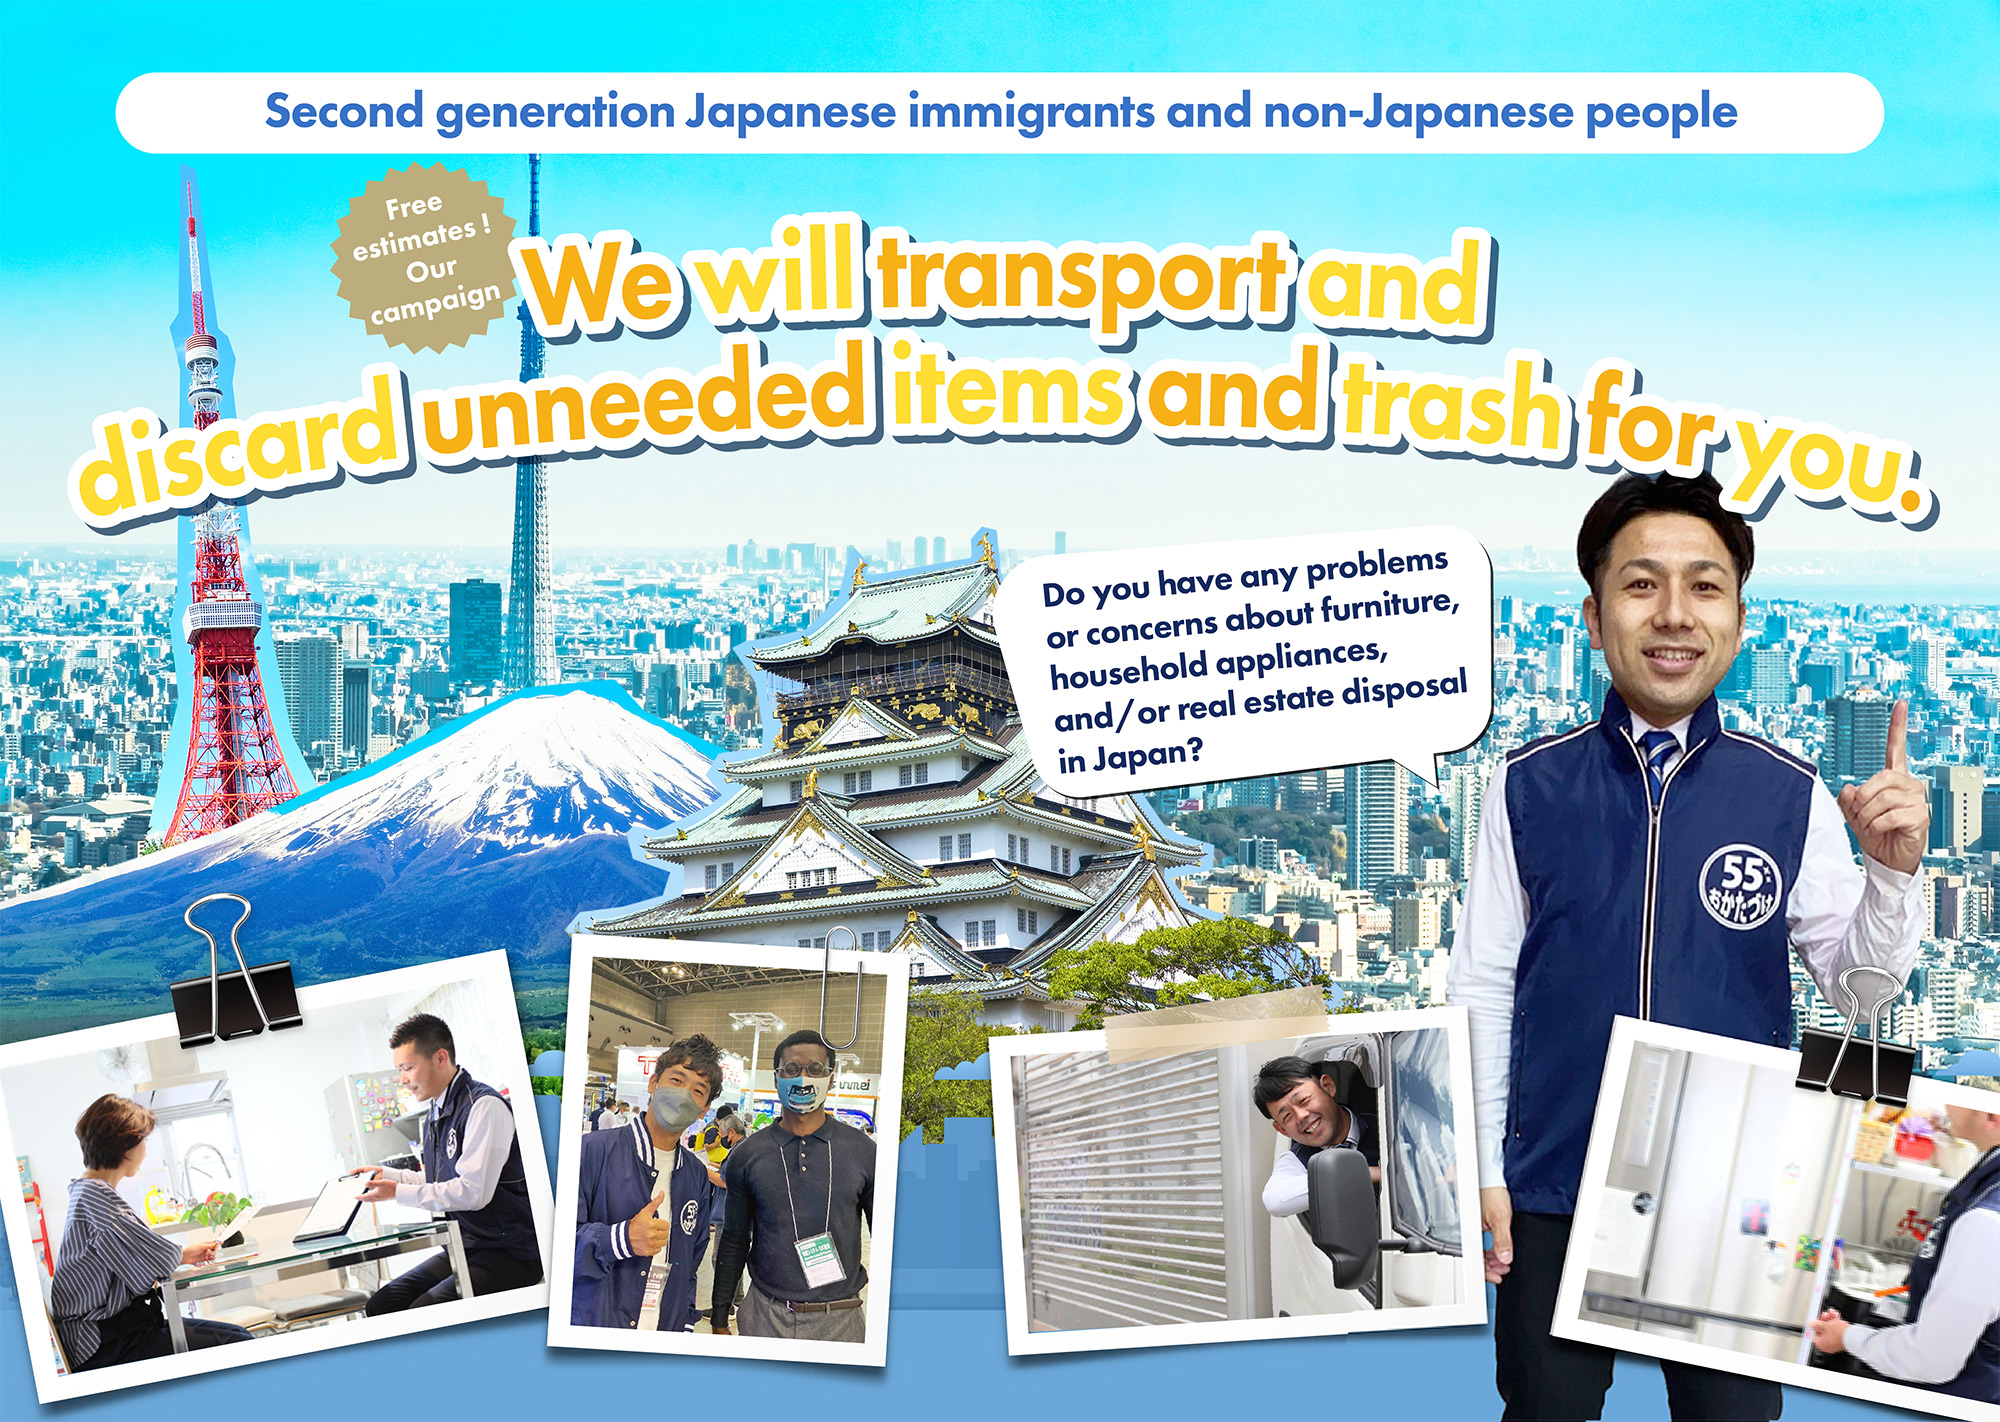 Second generation Japanese immigrants and non-Japanese people: Fee estimates! Our campaign / We will transport and discard unneeded items and trash for you. Do you have any problems or concerns about furniture, household appliances, and / or real estate disposal in Japan?